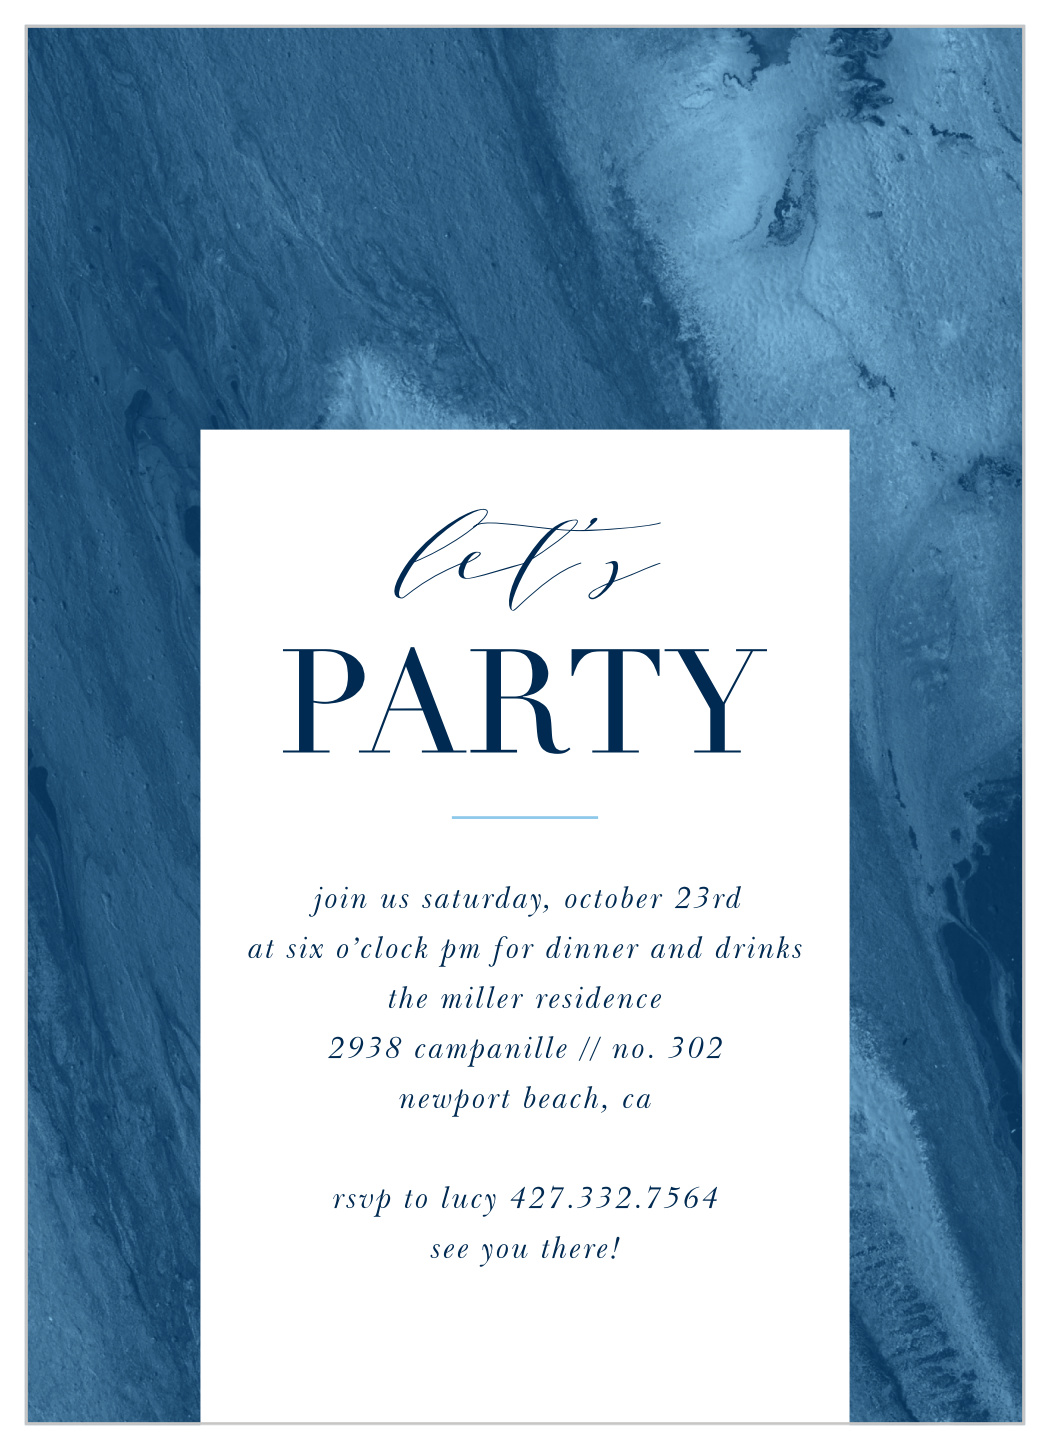 Marbled Azure Party Invitations